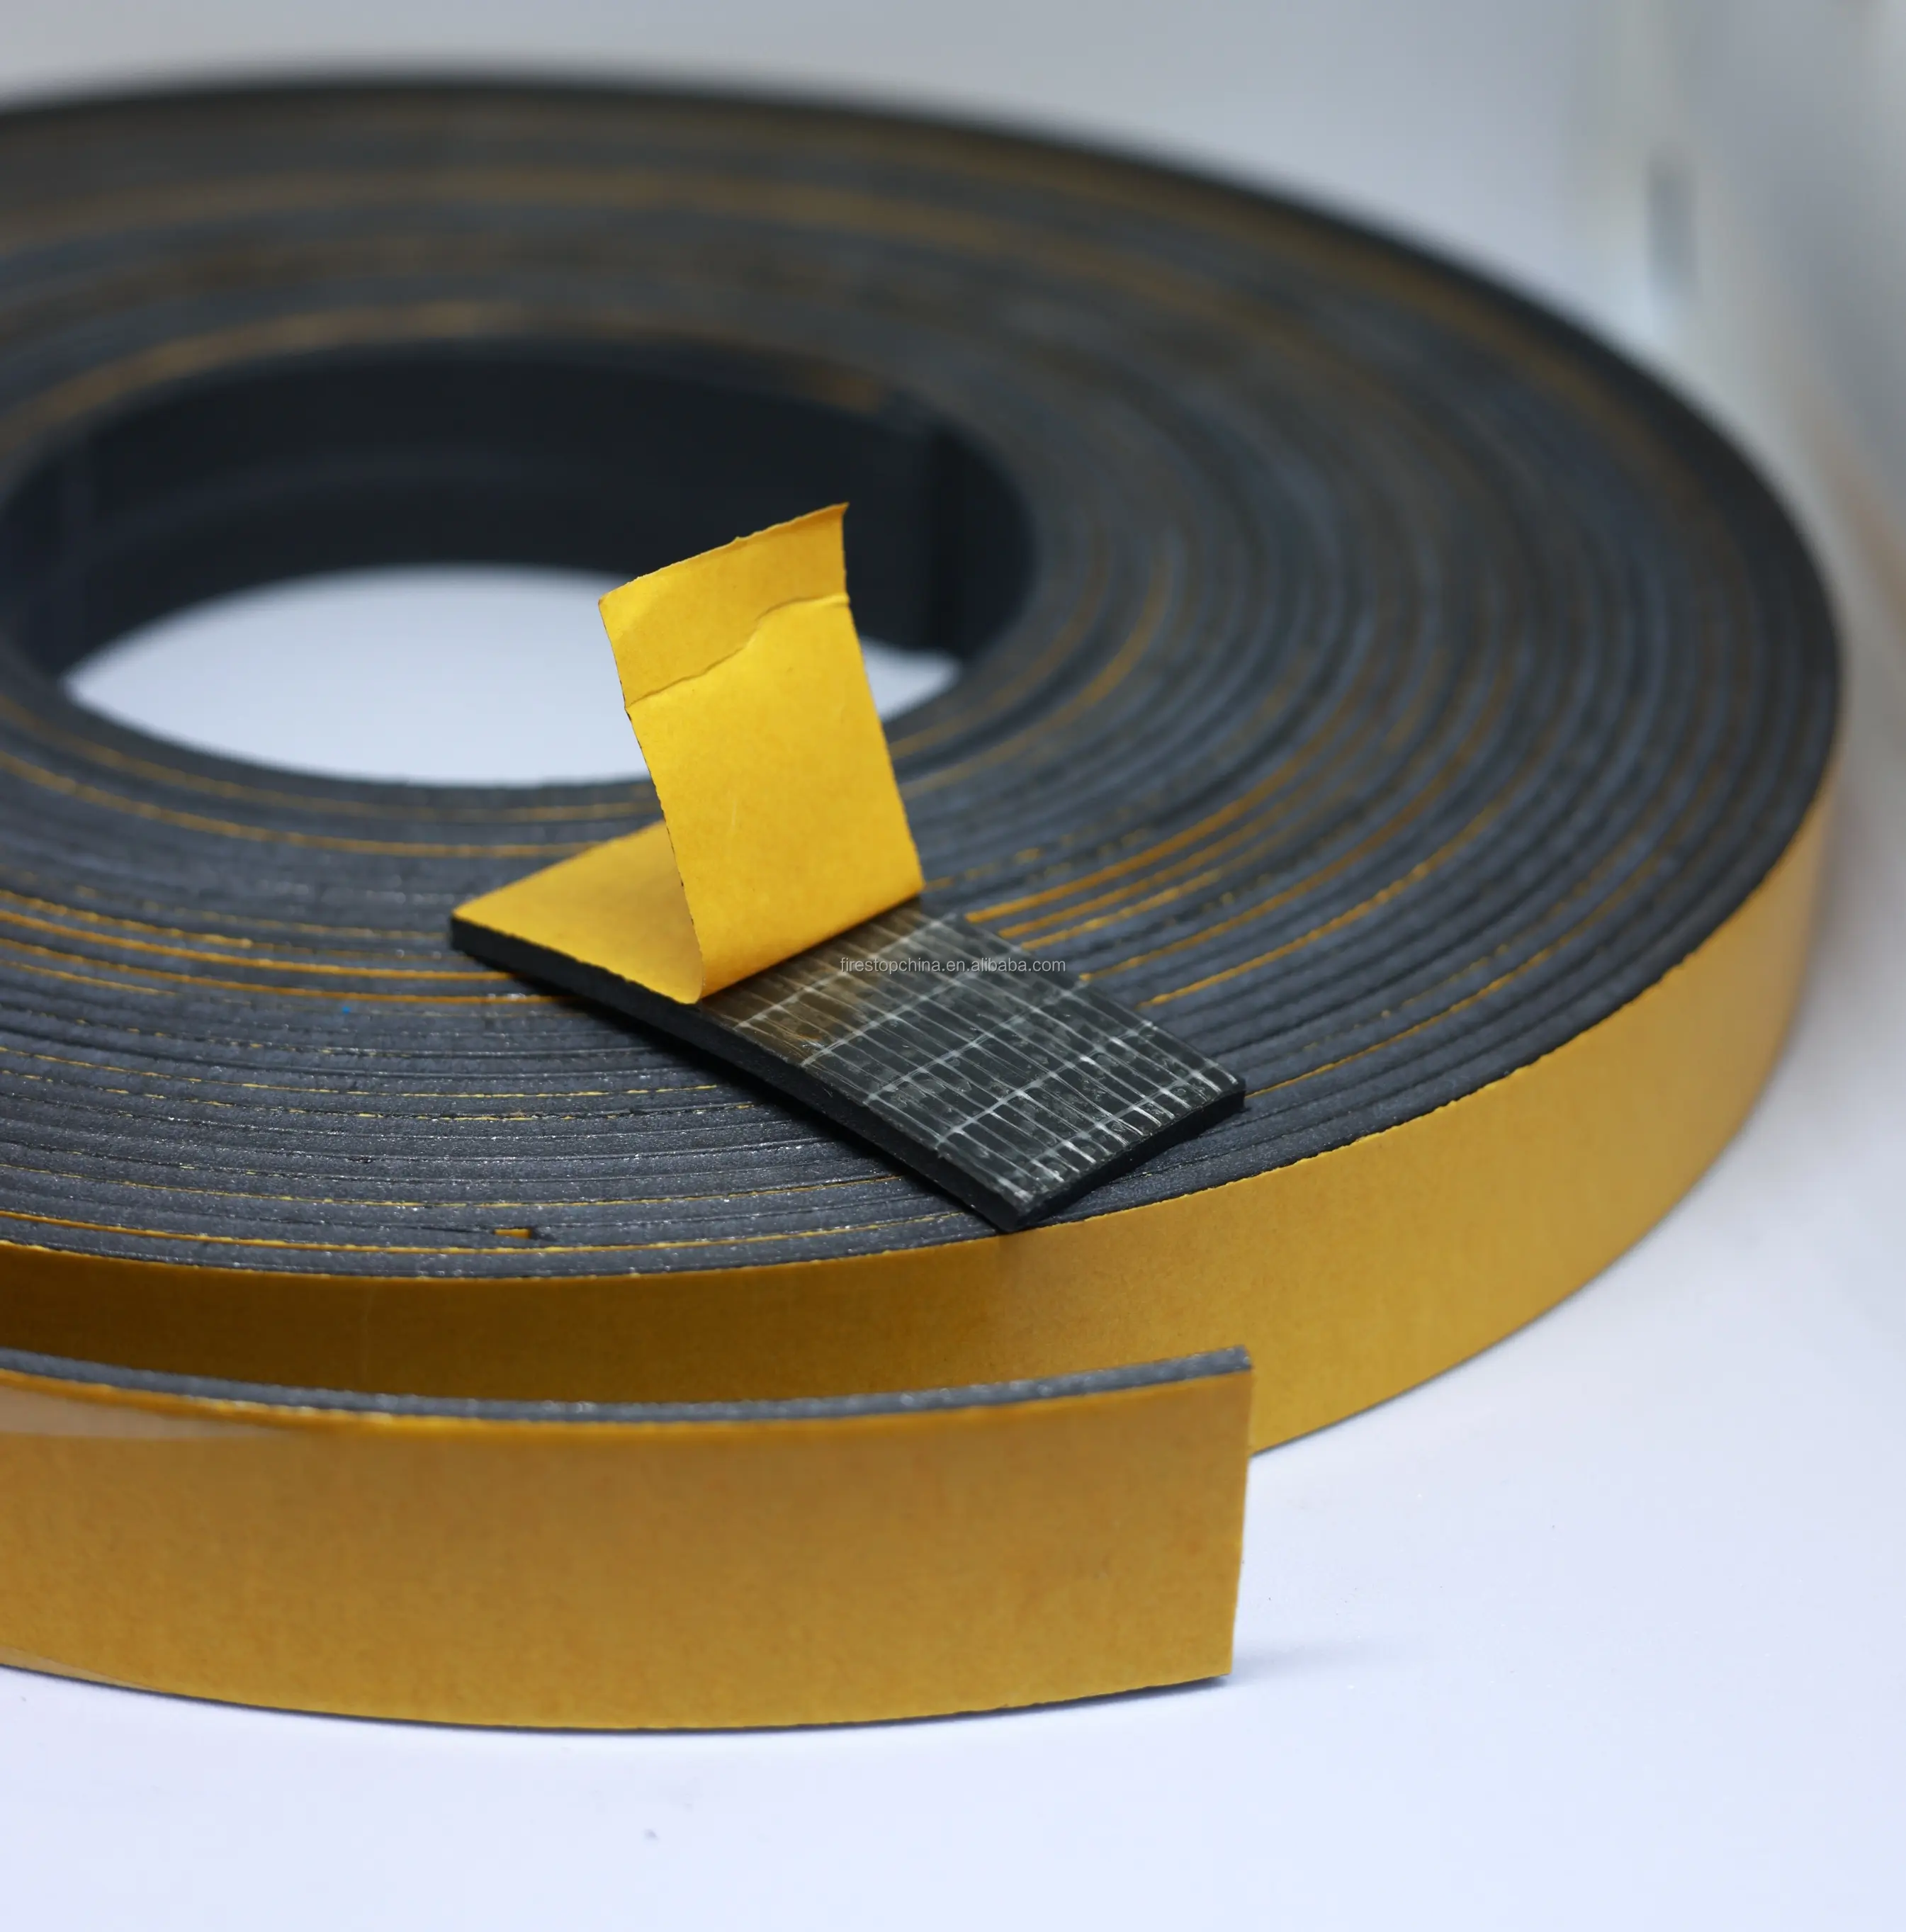 Fire Resistance Intumescent Fire rated Glazing Seal for windows and doors